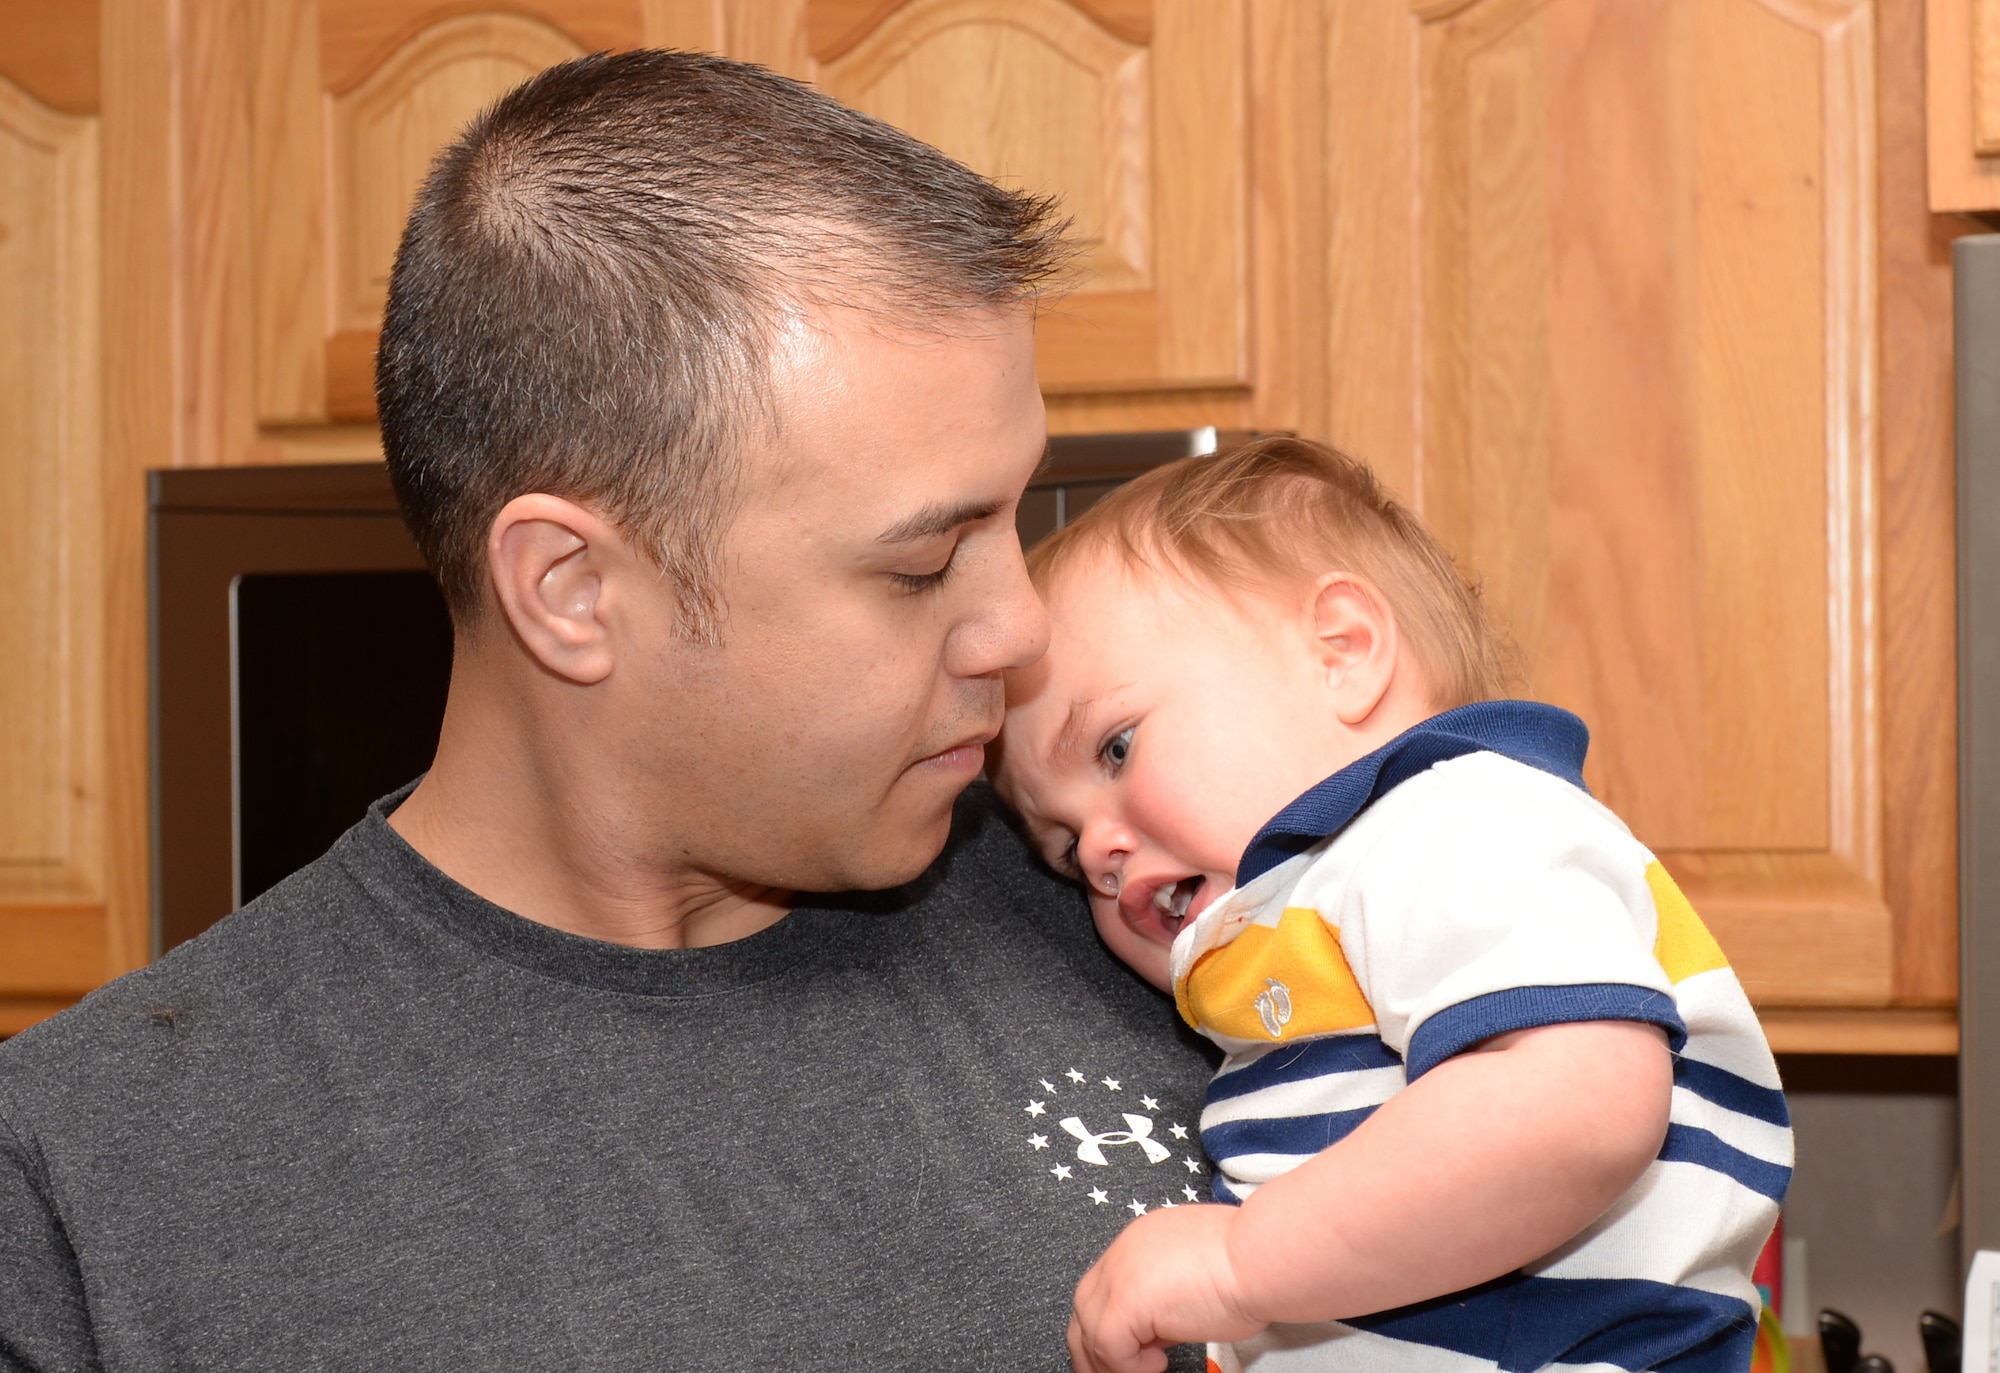 Tech. Sgt. Brian Thomas, the 28th Civil Engineer Squadron noncommissioned officer in charge of power production, comforts his son at home in Box Elder, S.D., April 19, 2018. The family has been involved with supporting community youth programs and working in orphanages for more than 10 years. (U.S. Air Force photo by Airman 1st Class Nicolas Z. Erwin)